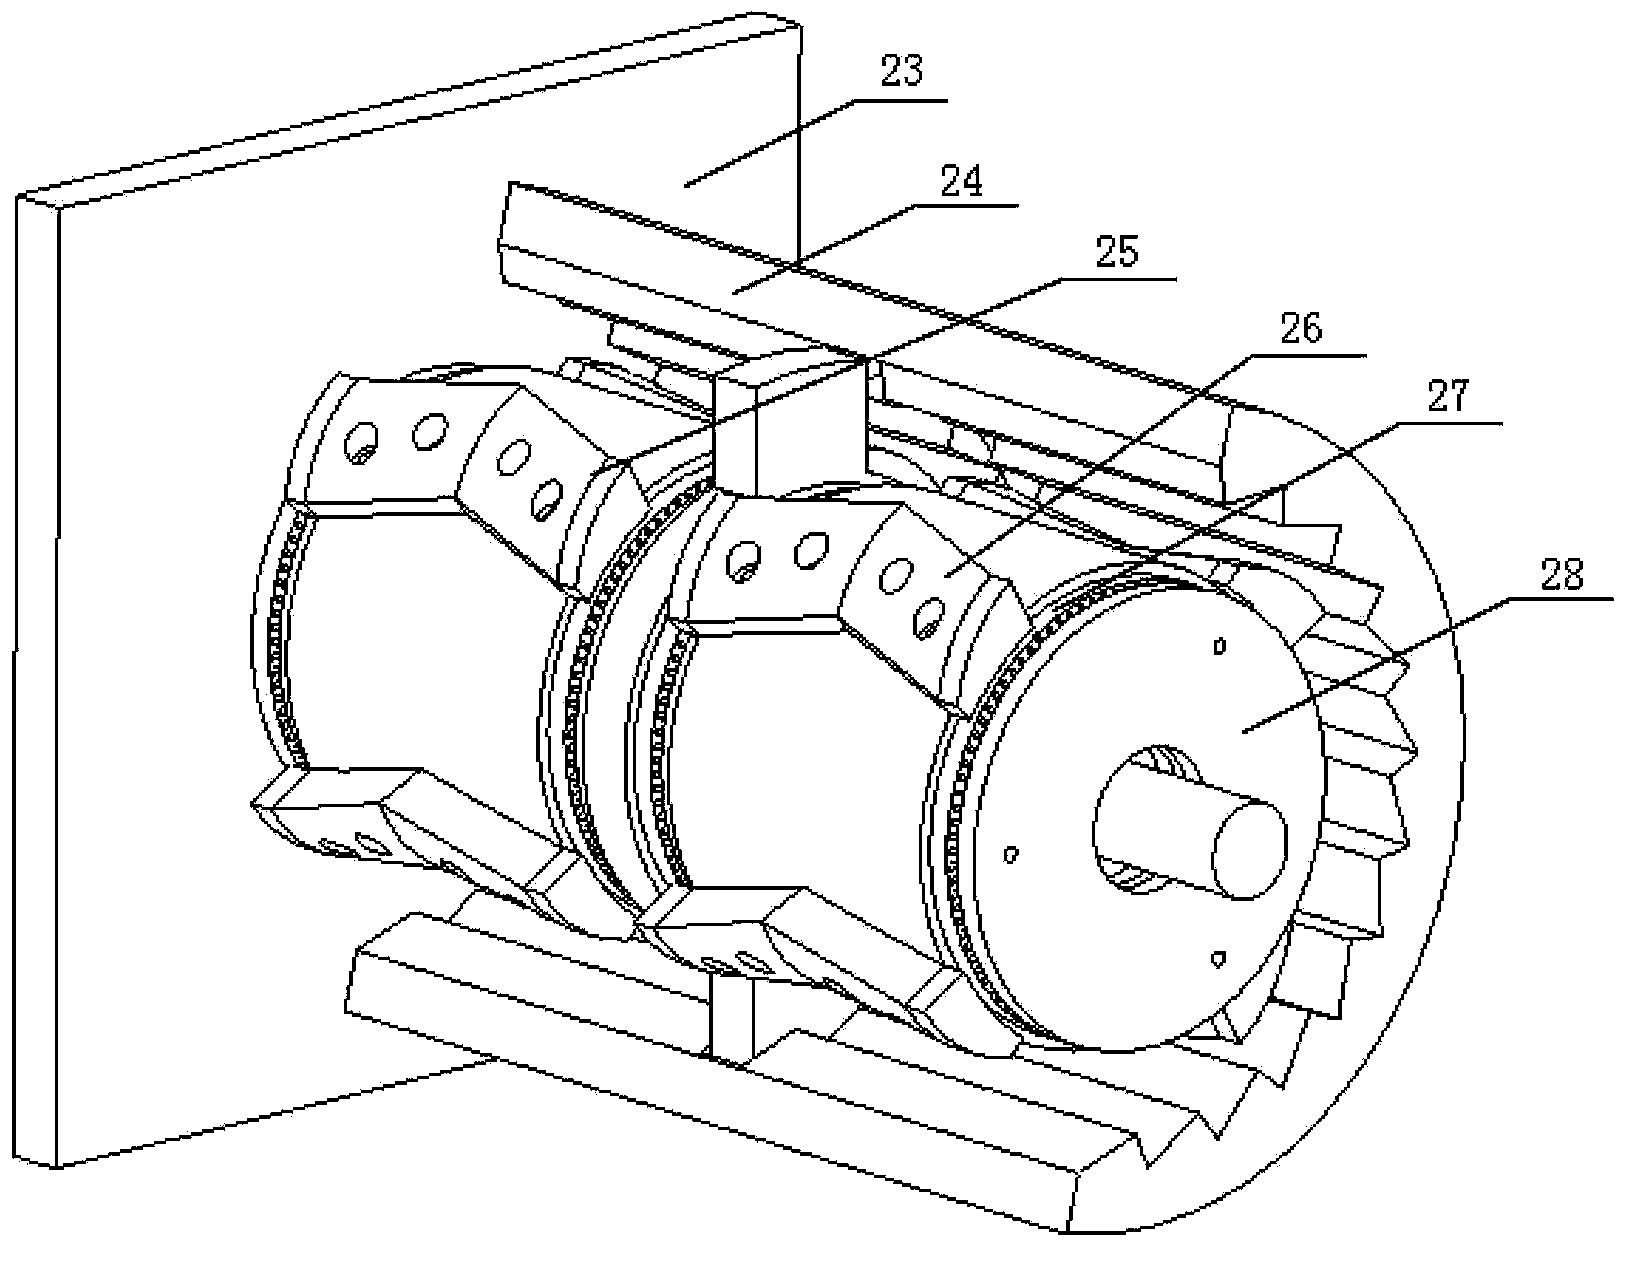 Device for regenerating waste and old thermosetting plastics, and technology thereof